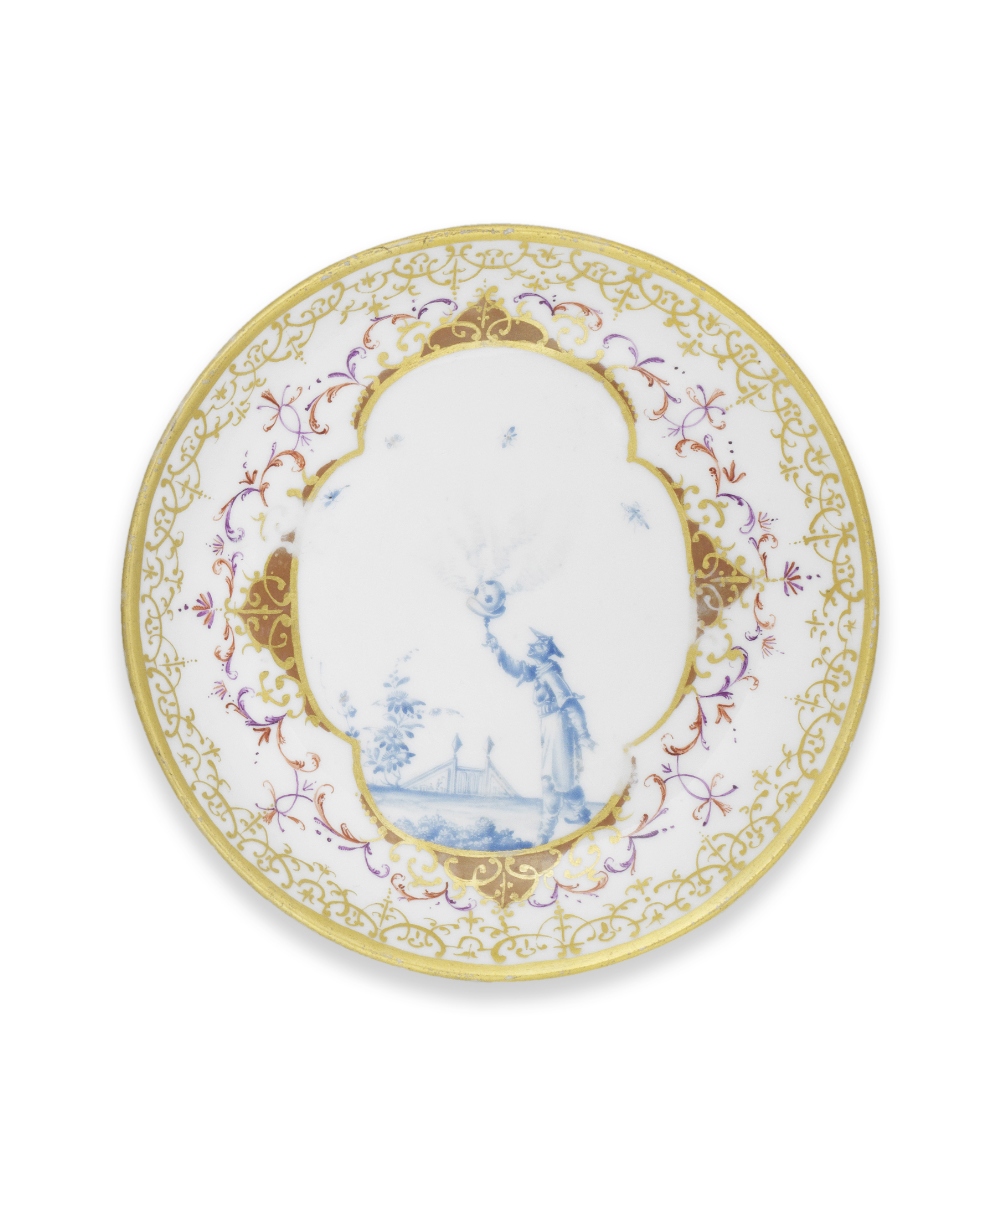 A very rare Meissen beaker and saucer, circa 1728 - Image 3 of 4